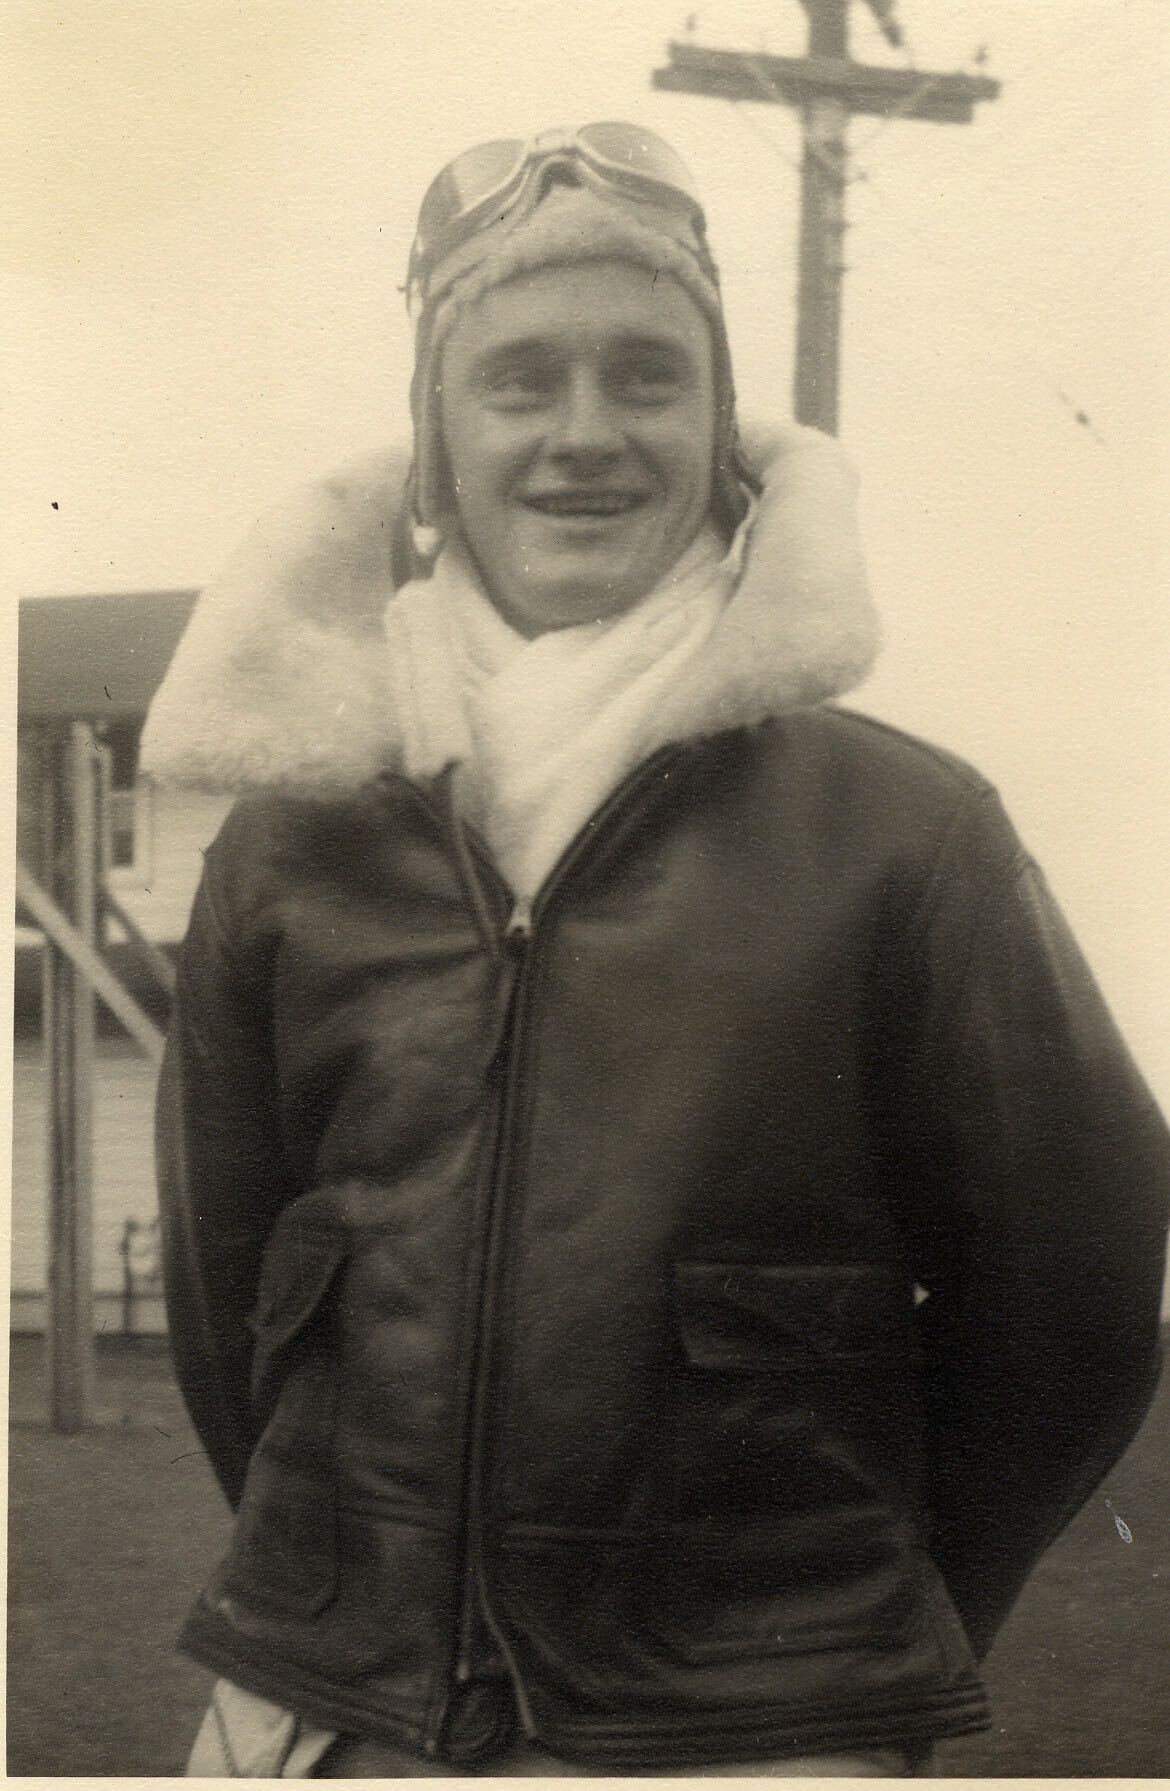 My grandfather, James Chester Roush, wearing his bombardier jacket prior to a training mission aboard the B-26 bomber he flew with the U.S. Army Air Corps